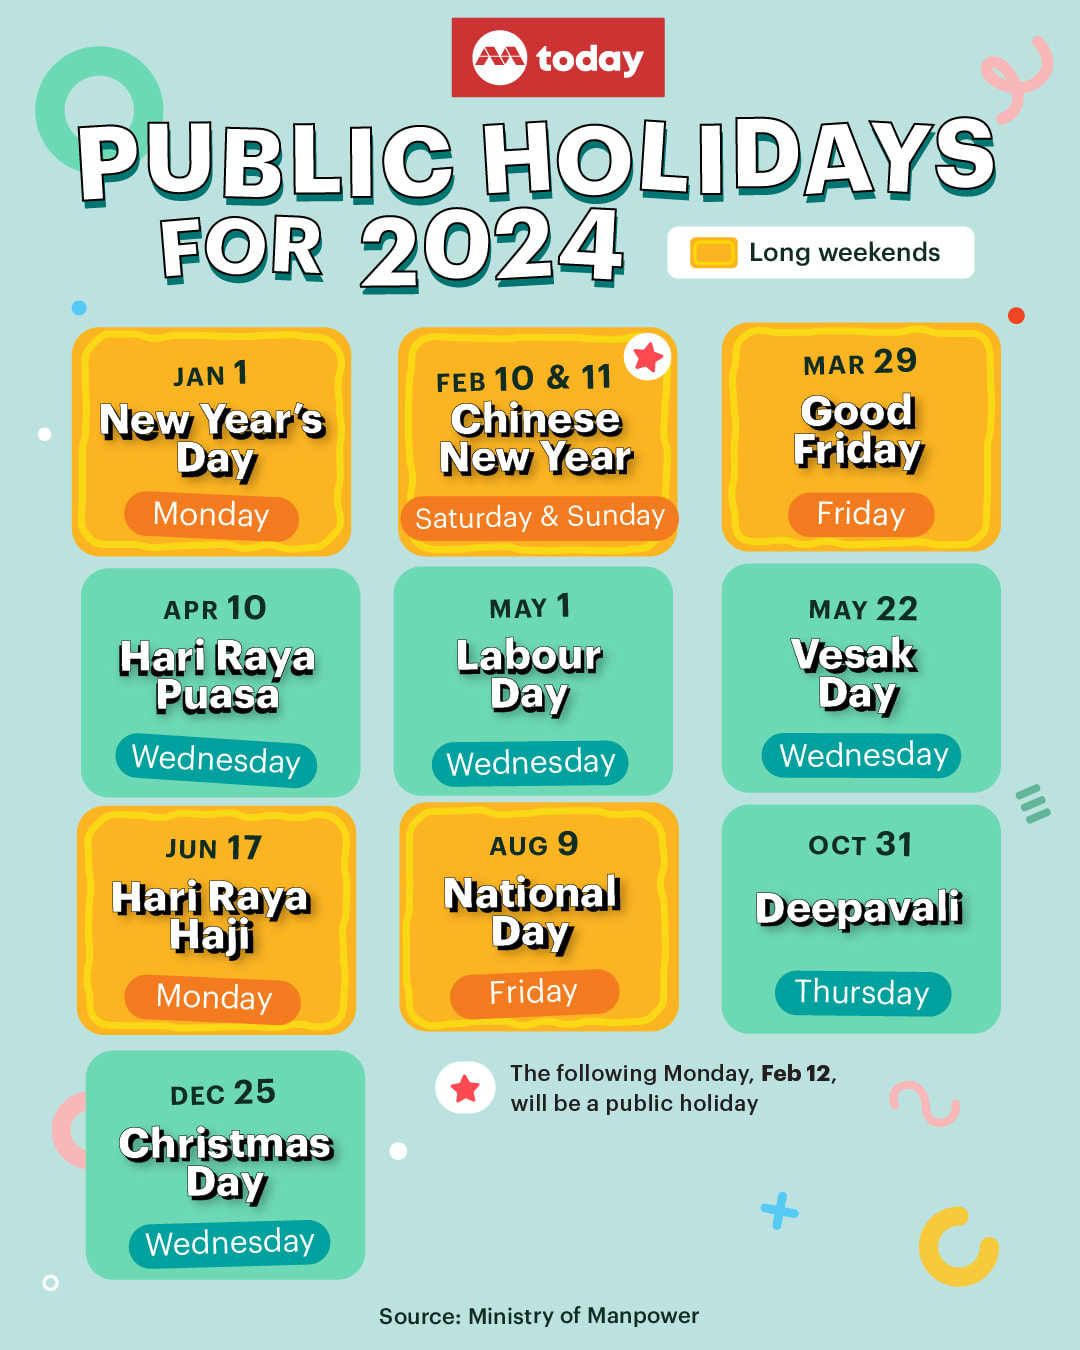 Singapore public holidays in 2024 includes 5 long weekends TODAY